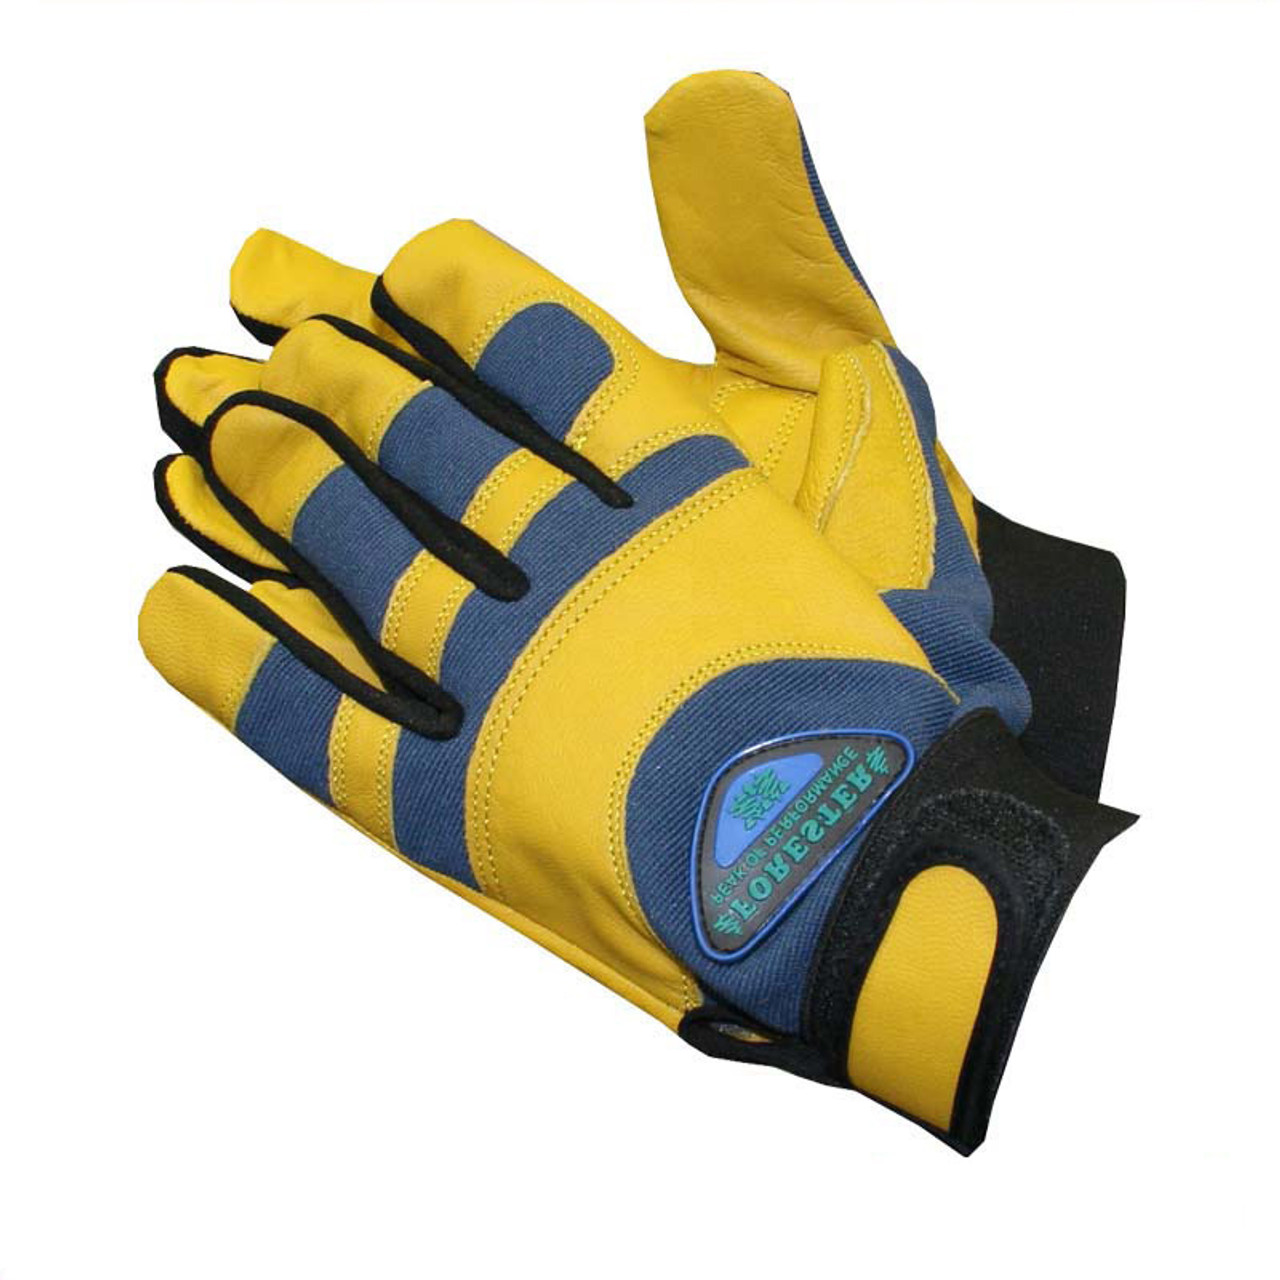 Work safety gloves - F1001 - Fullstar Non-woven Products - anti-cut /  leather / cotton